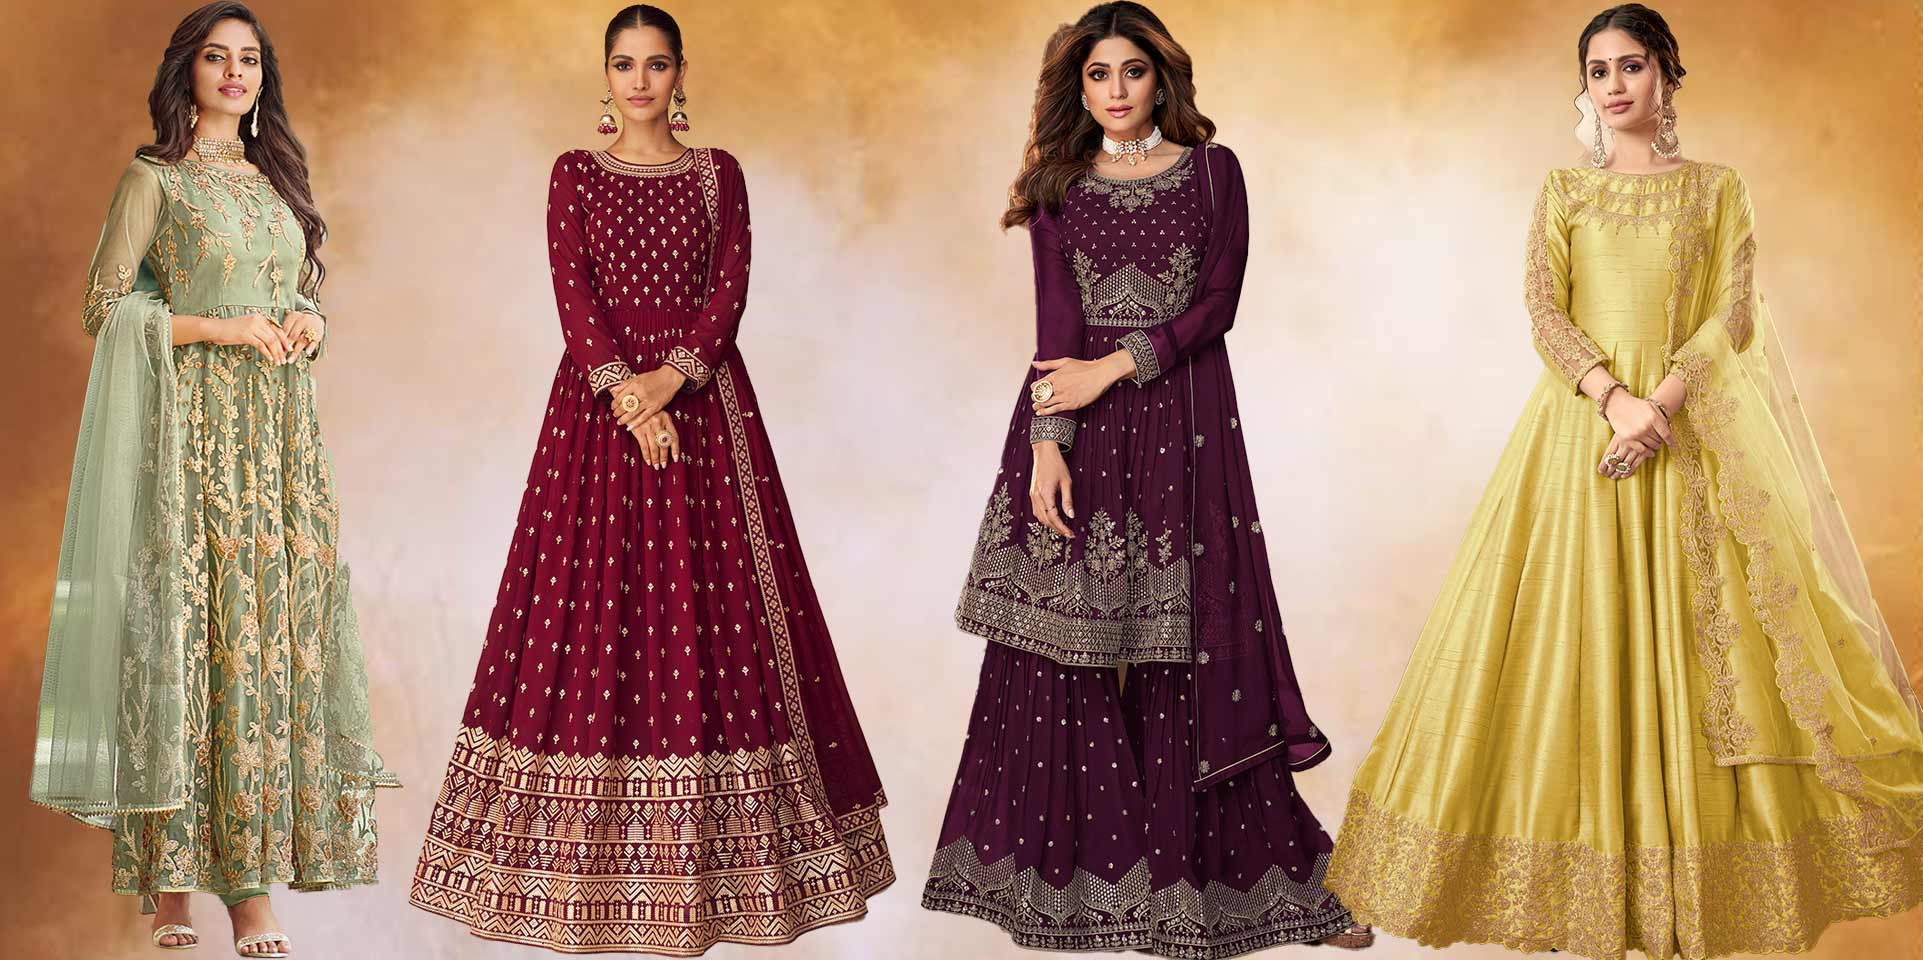 Which are the Top 6 Eye-Catching Indian Dresses for Women?